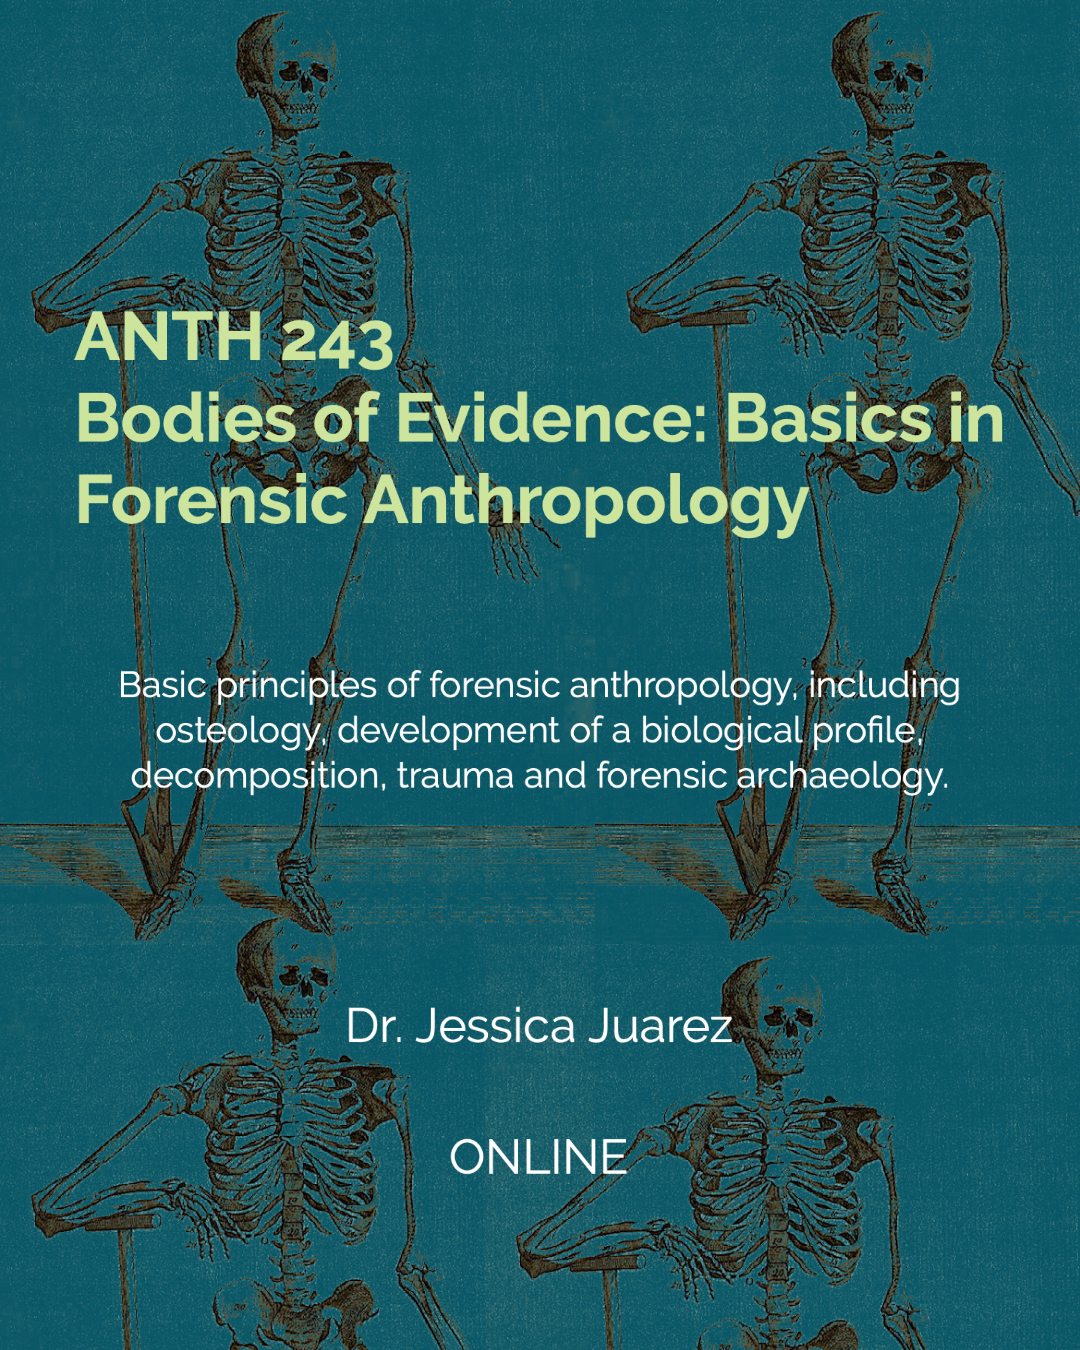 ANTH 243: Bodies of Evidence: Basics in Forensic Anthropology